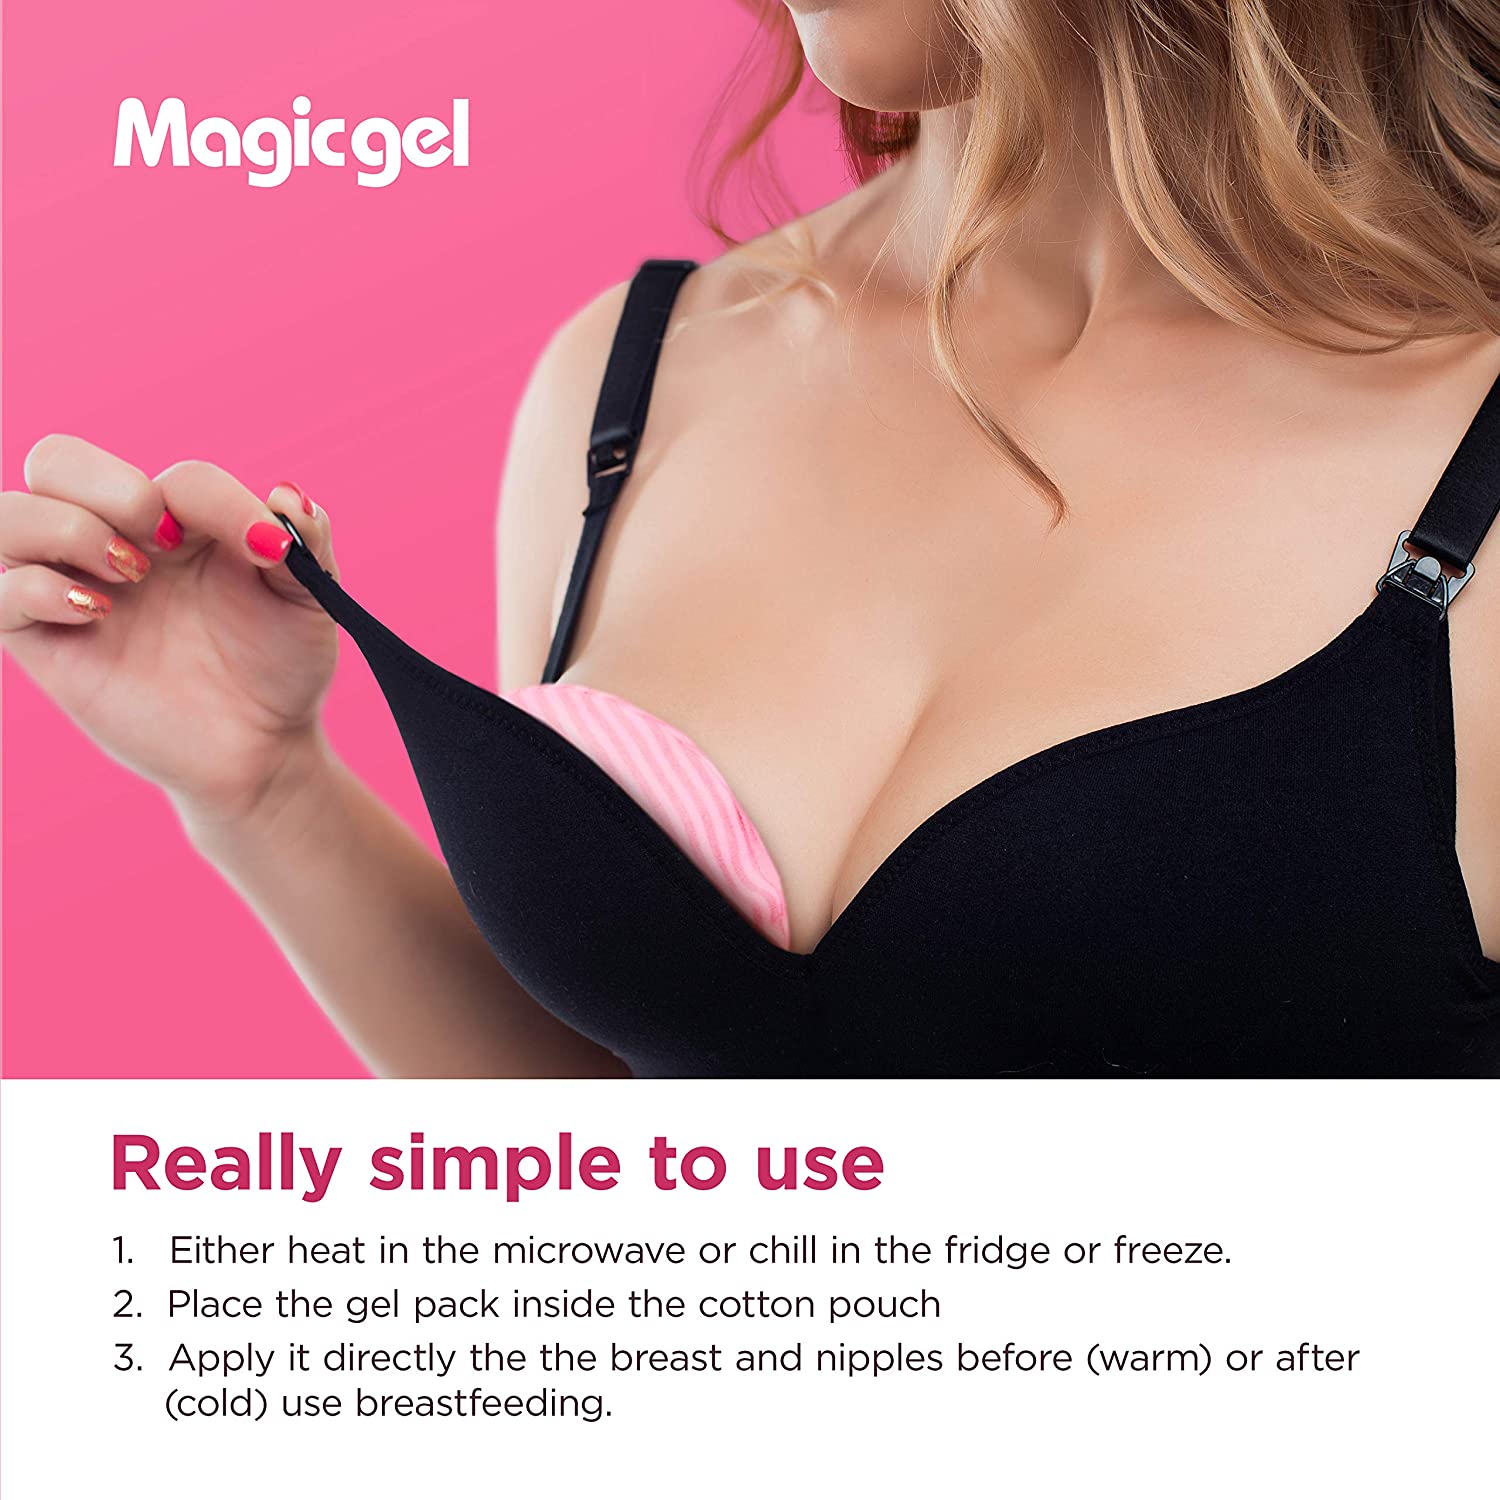 Why should I use a hot or cold gel pack to treat my swollen breasts? –  Gelpacks